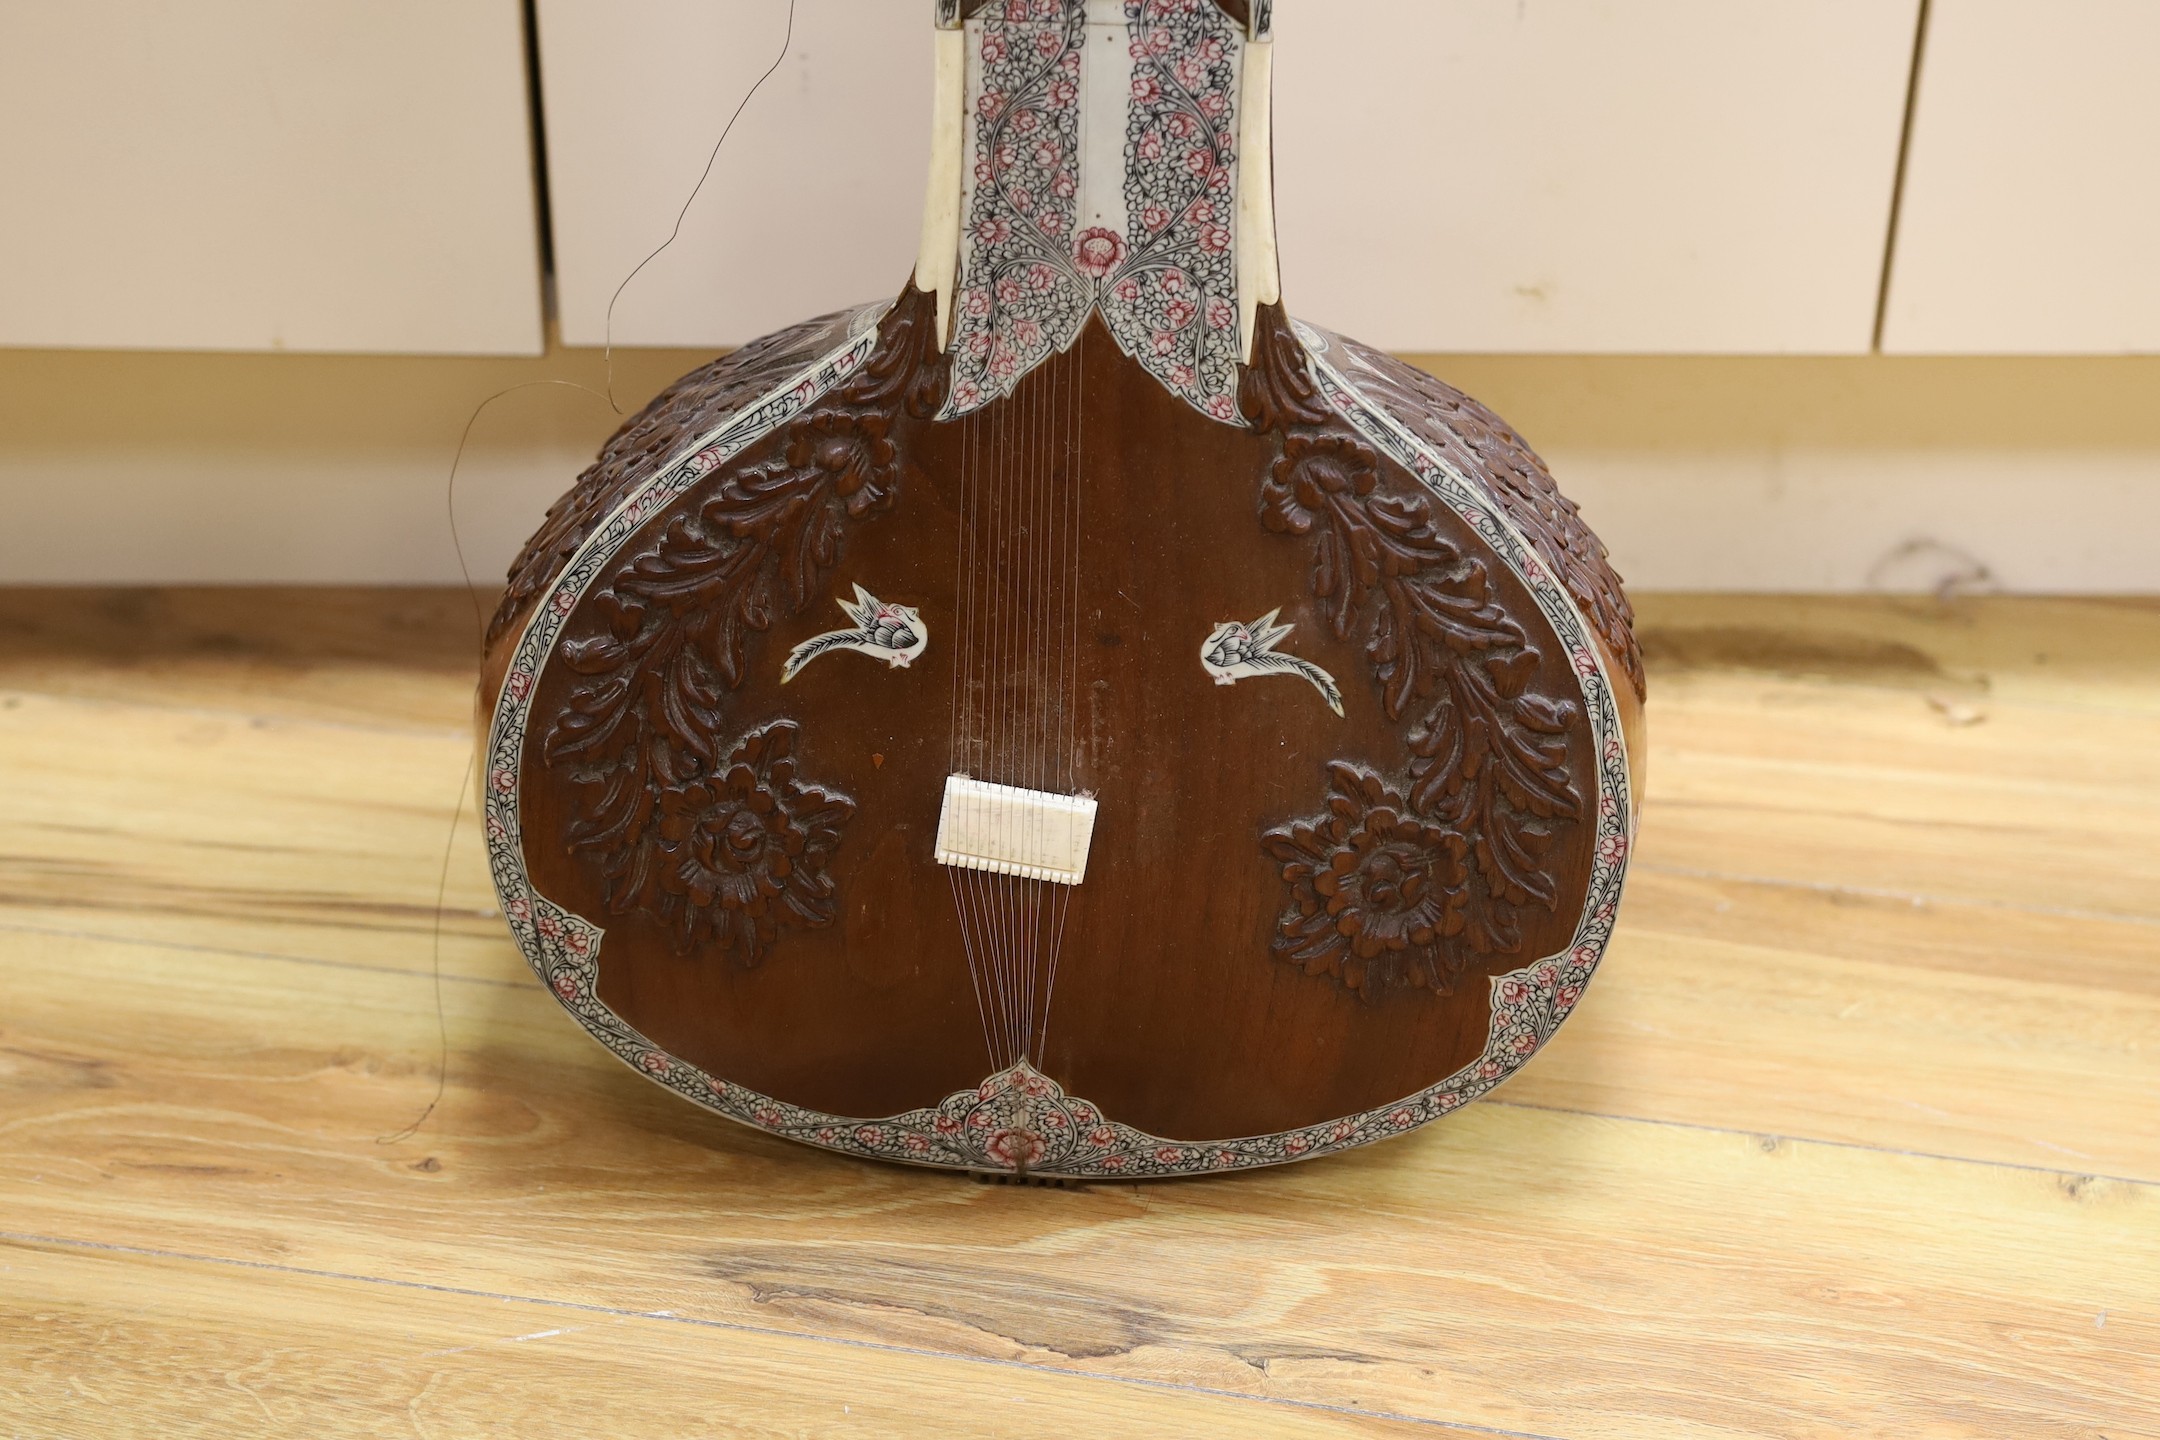 A sitar with wooden carved decoration